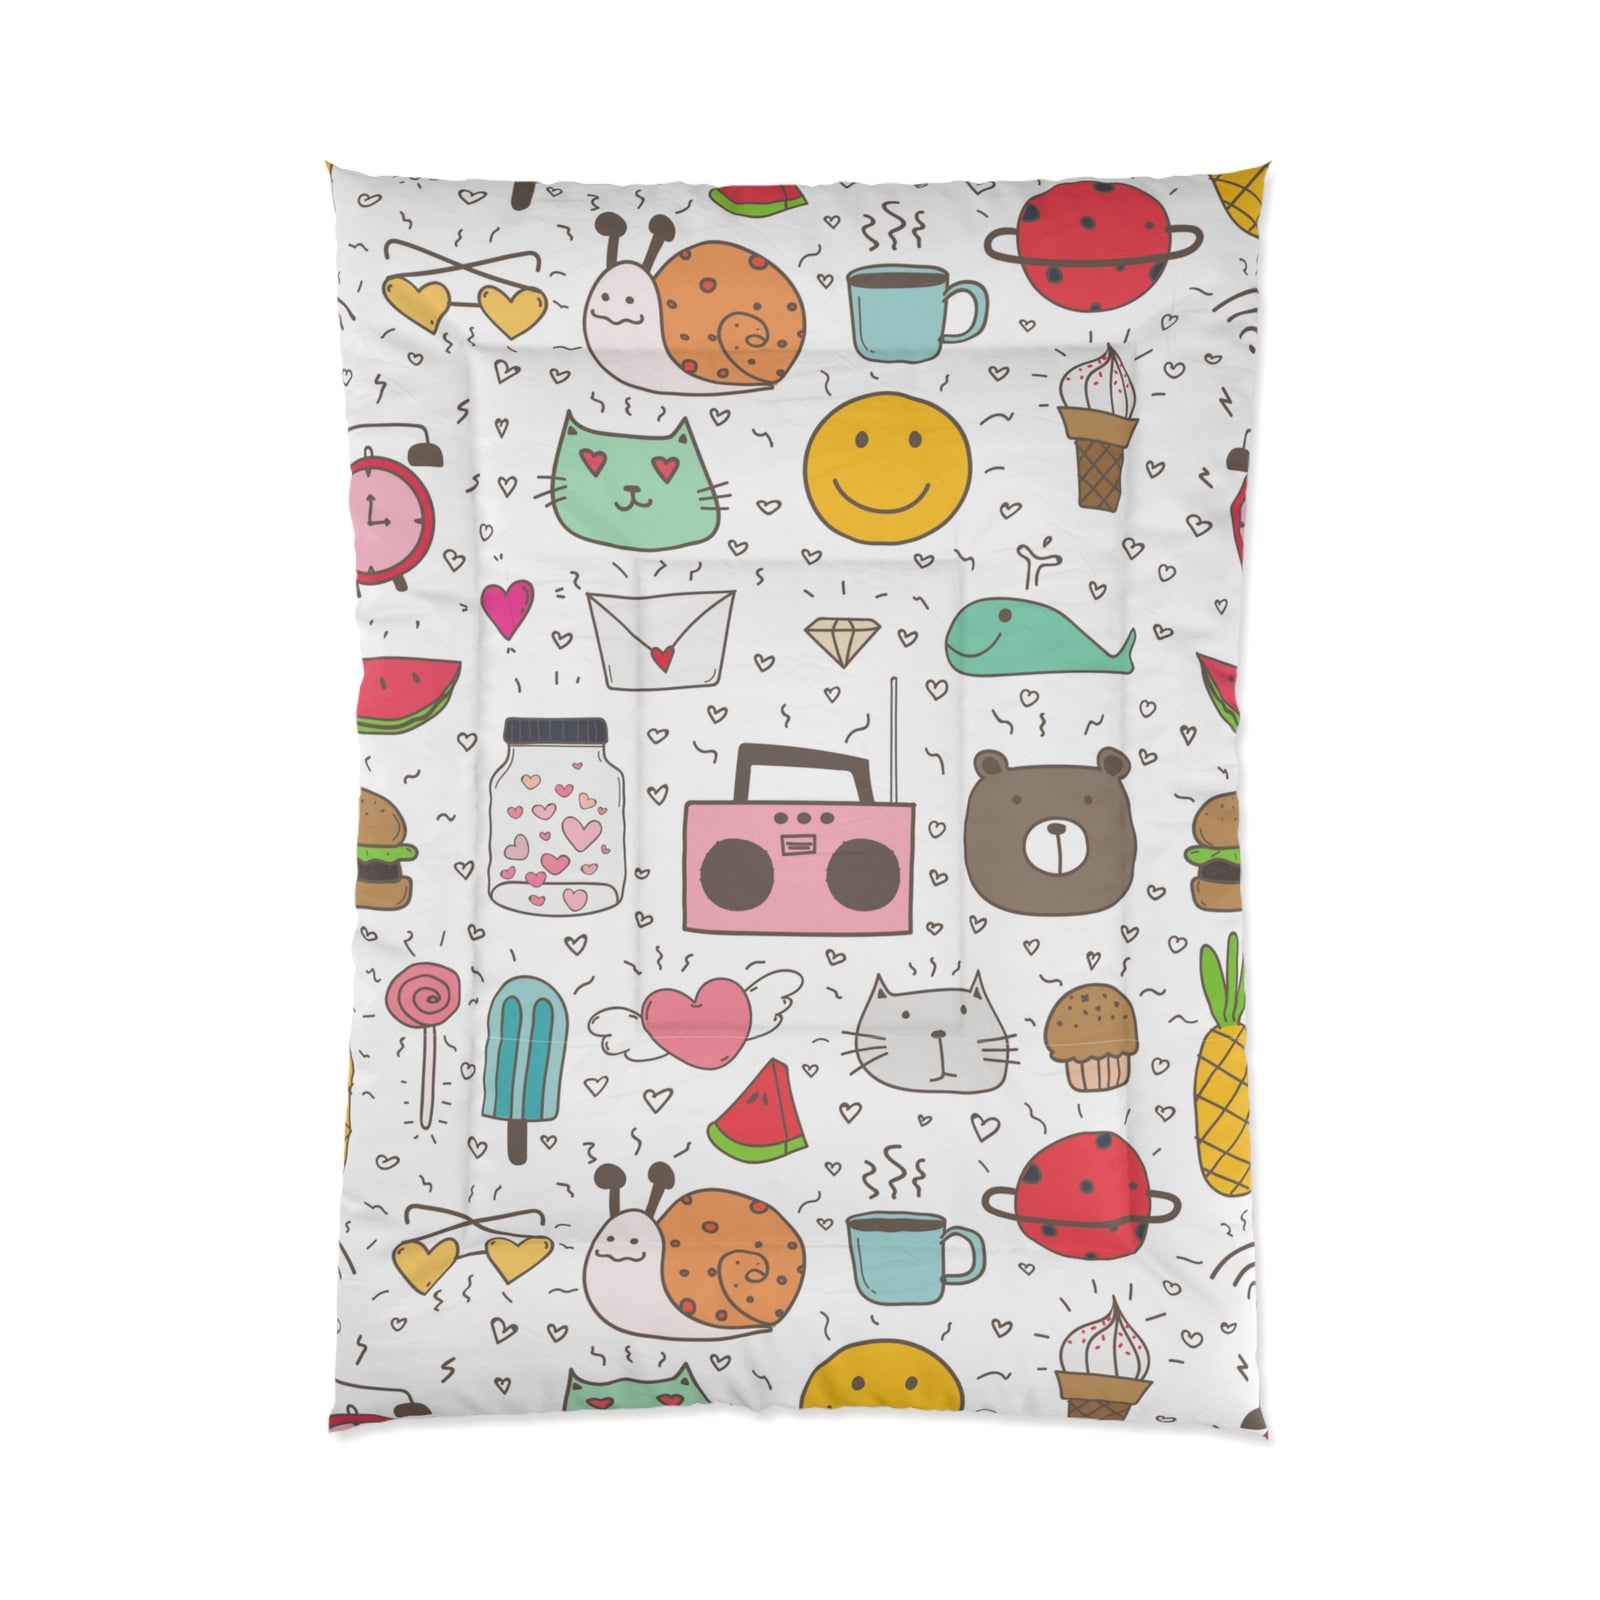 Kids' Wonderland Comforter - A Cool and Trending Pattern with Hearts, Toys, Emojis, Bears, and More - Perfect for a Playful and Vibrant Bedroom Atmosphere